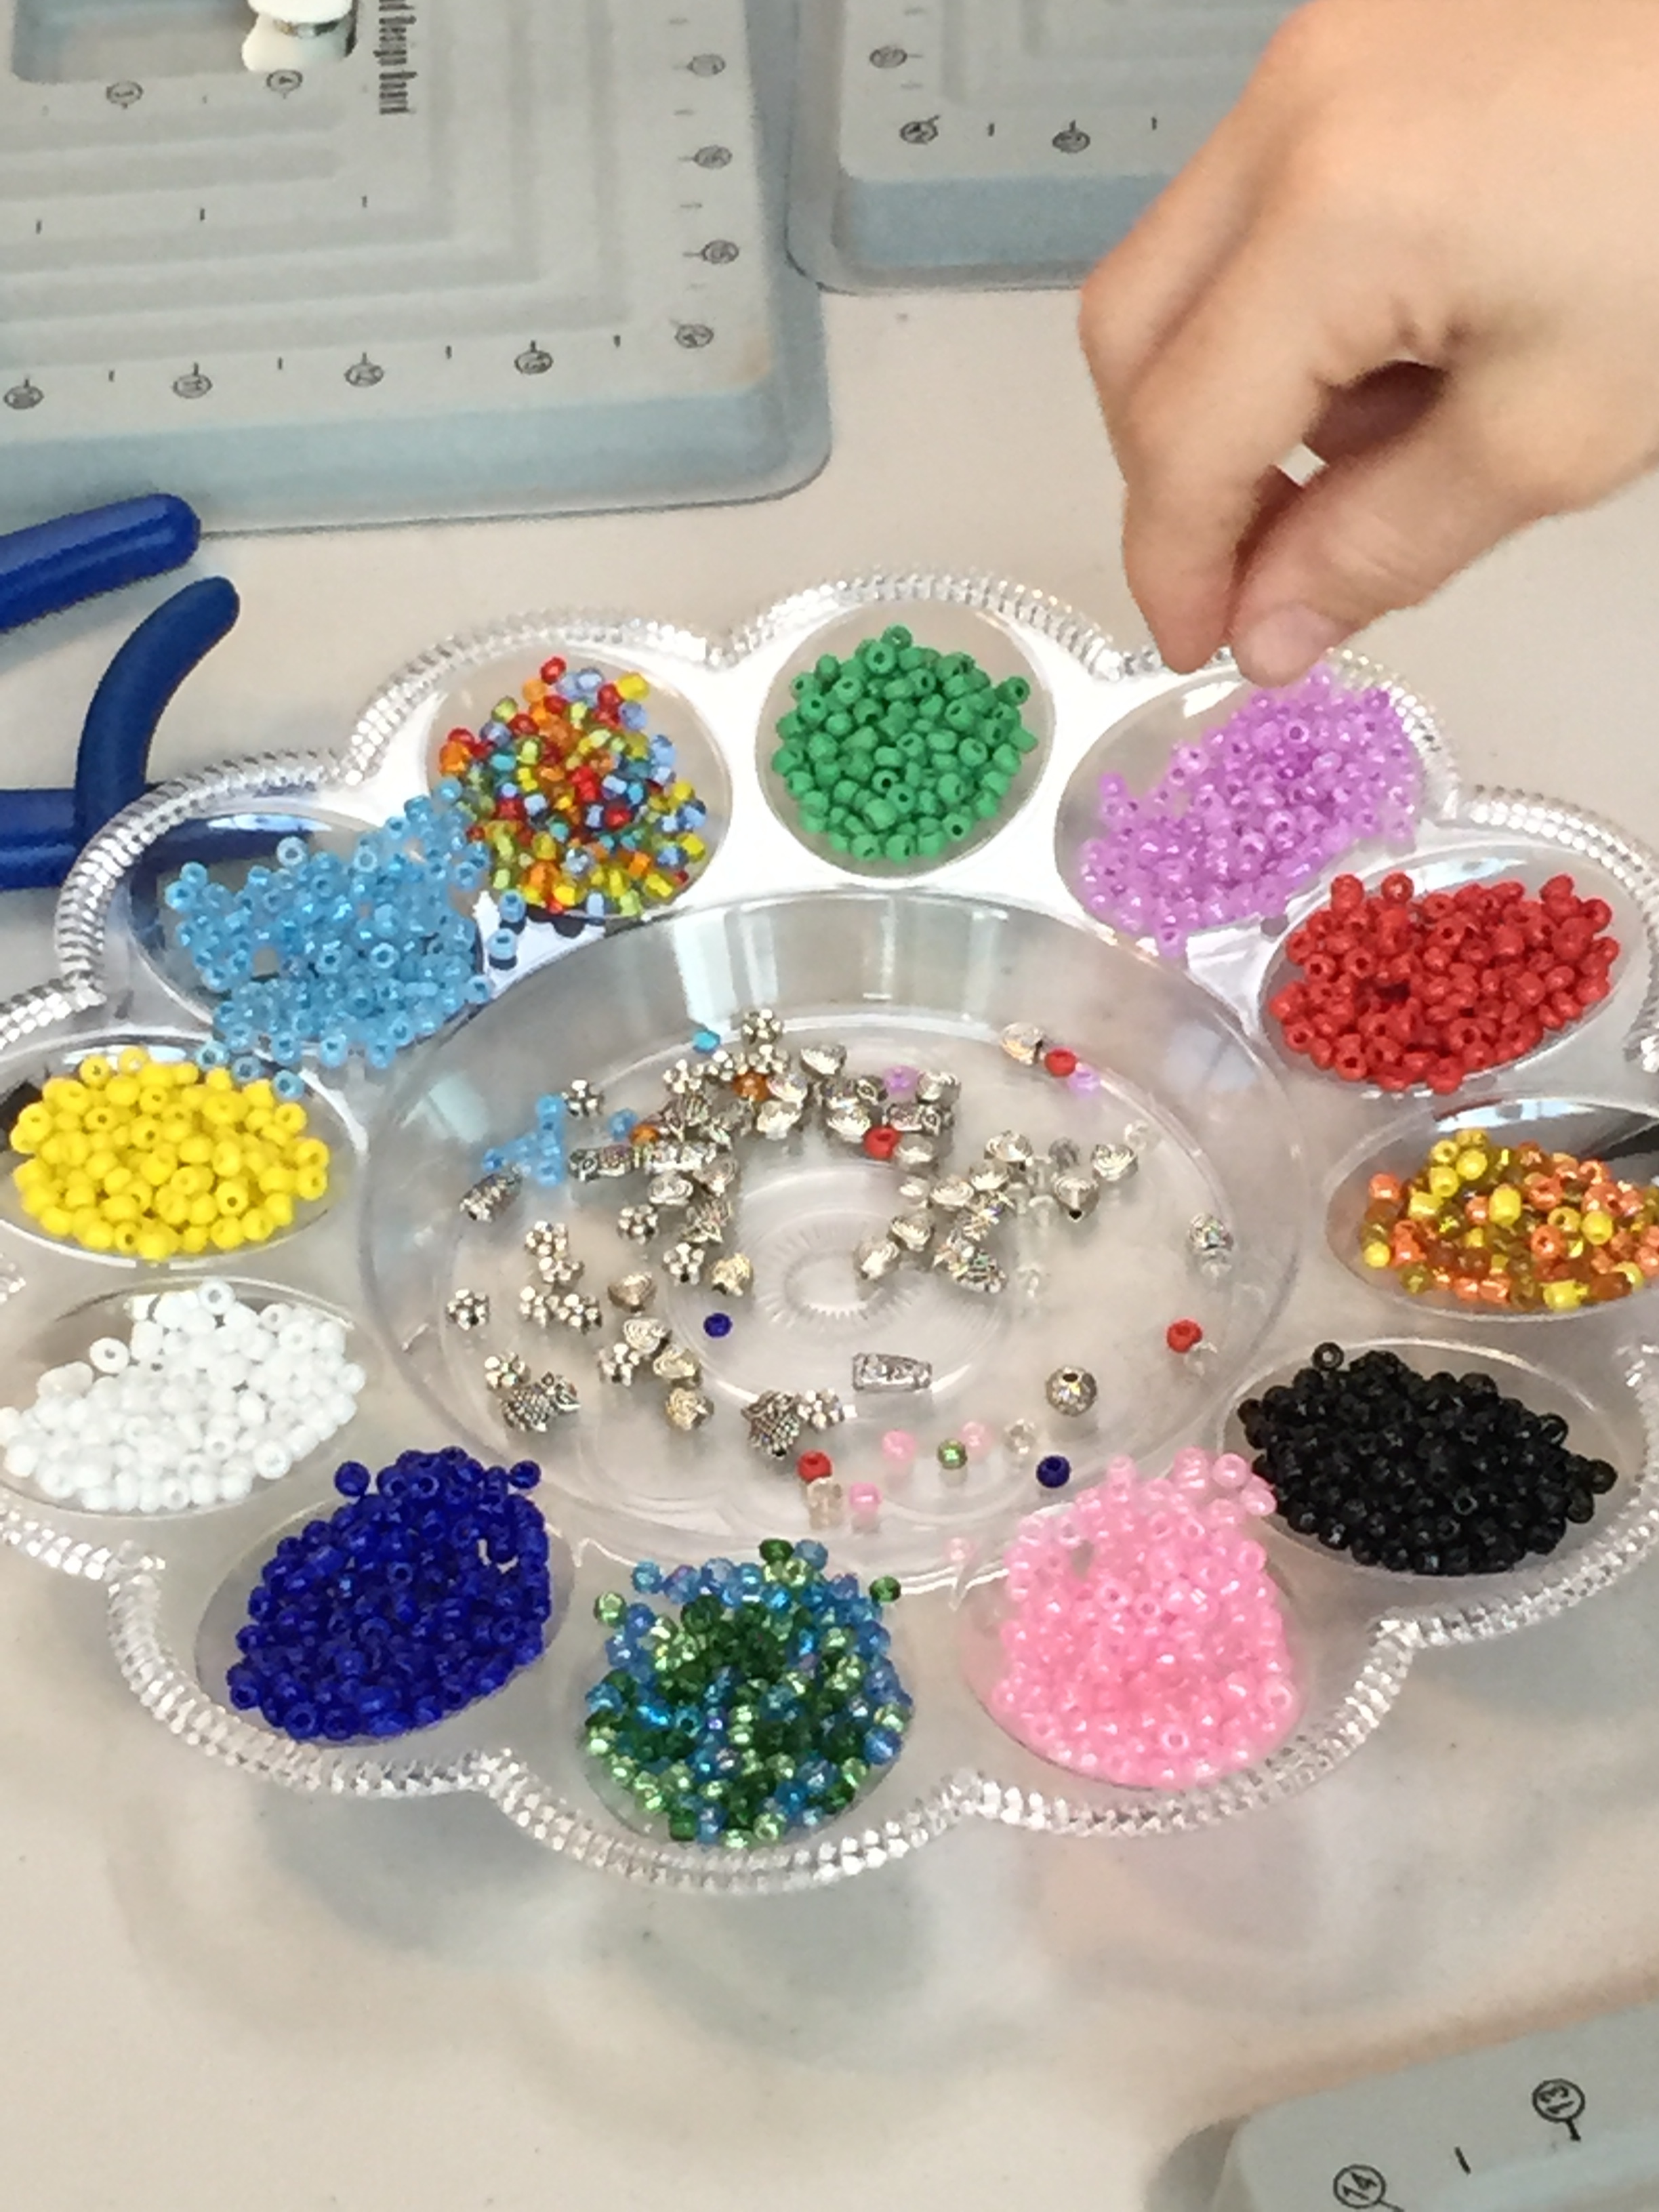 Look at all those lovely beads!